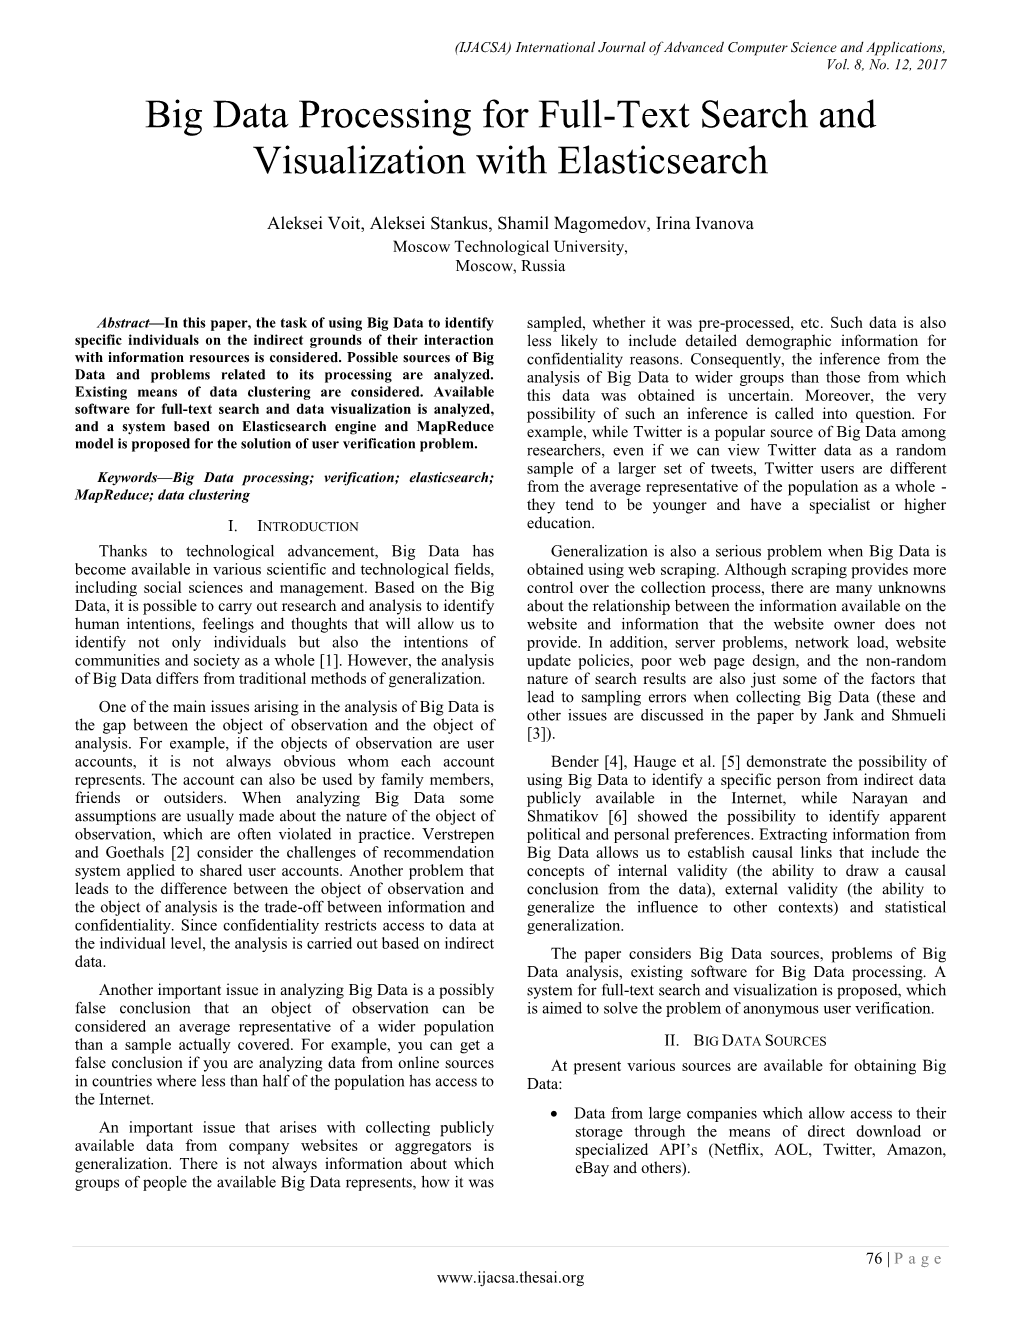 Big Data Processing for Full-Text Search and Visualization with Elasticsearch